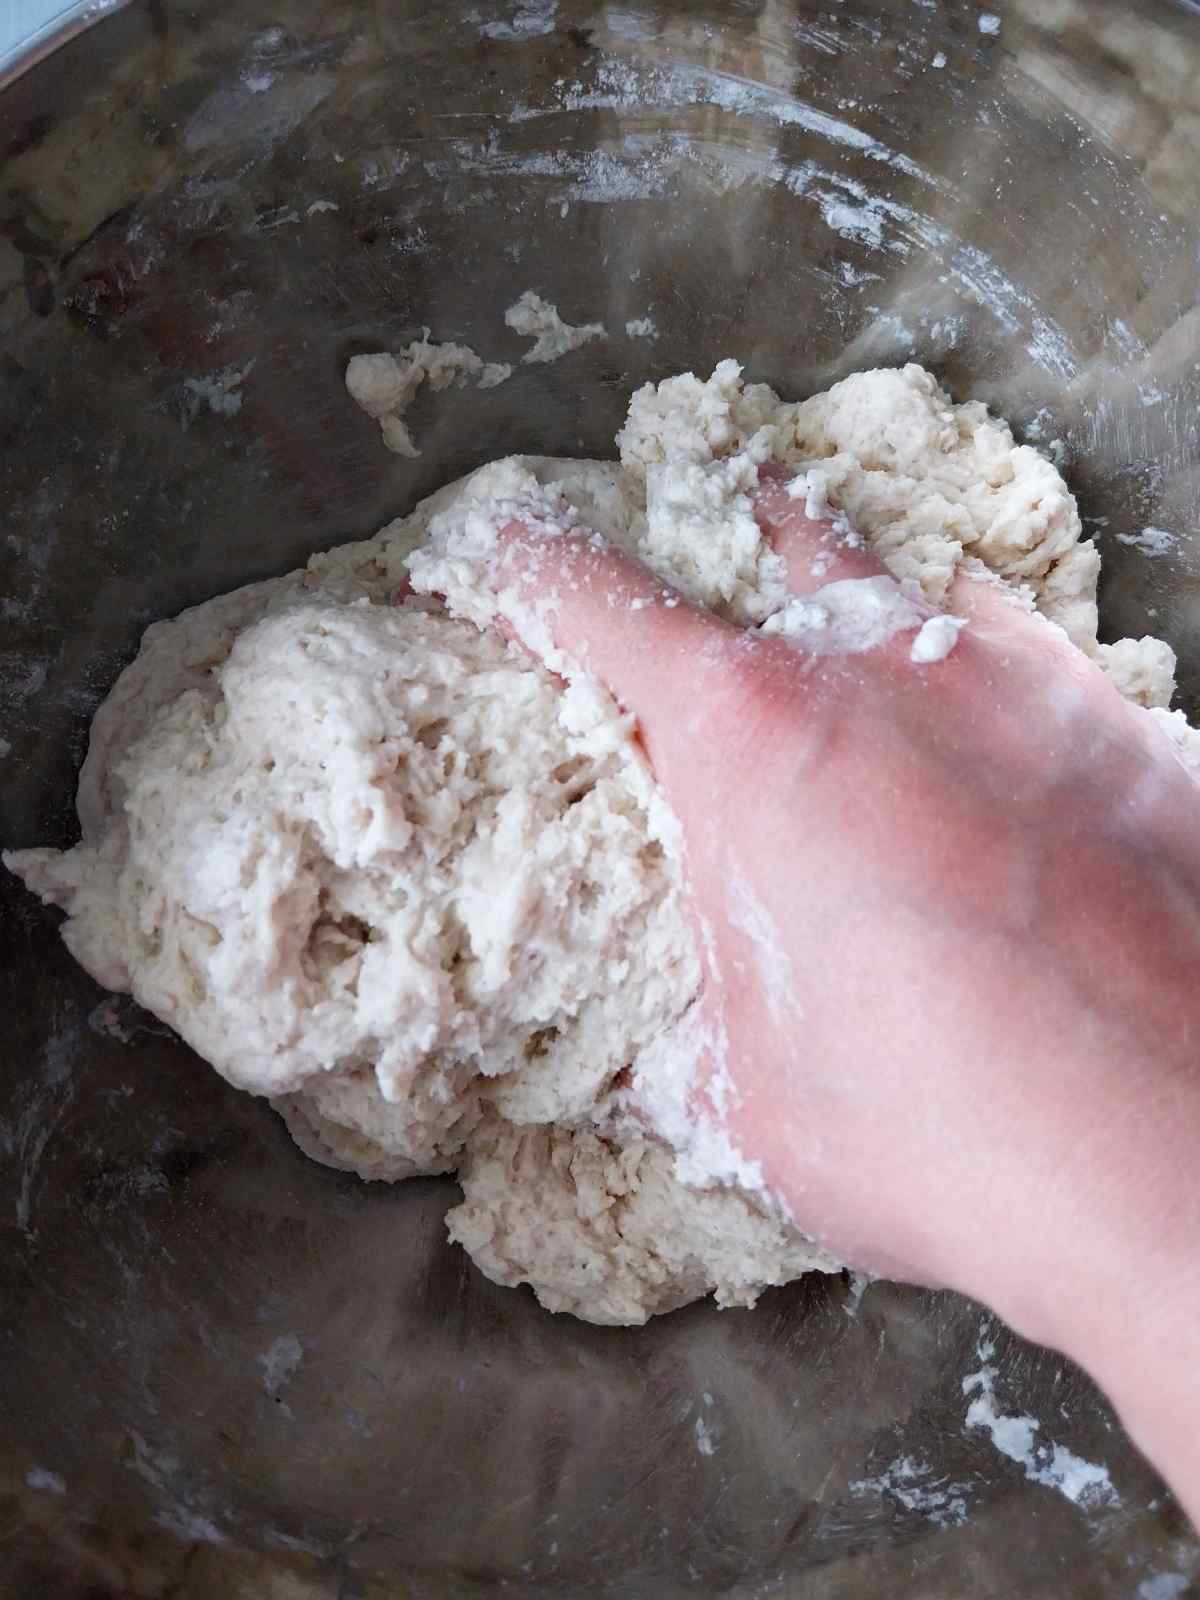 Kneading the dough by hand in a metal bowl.